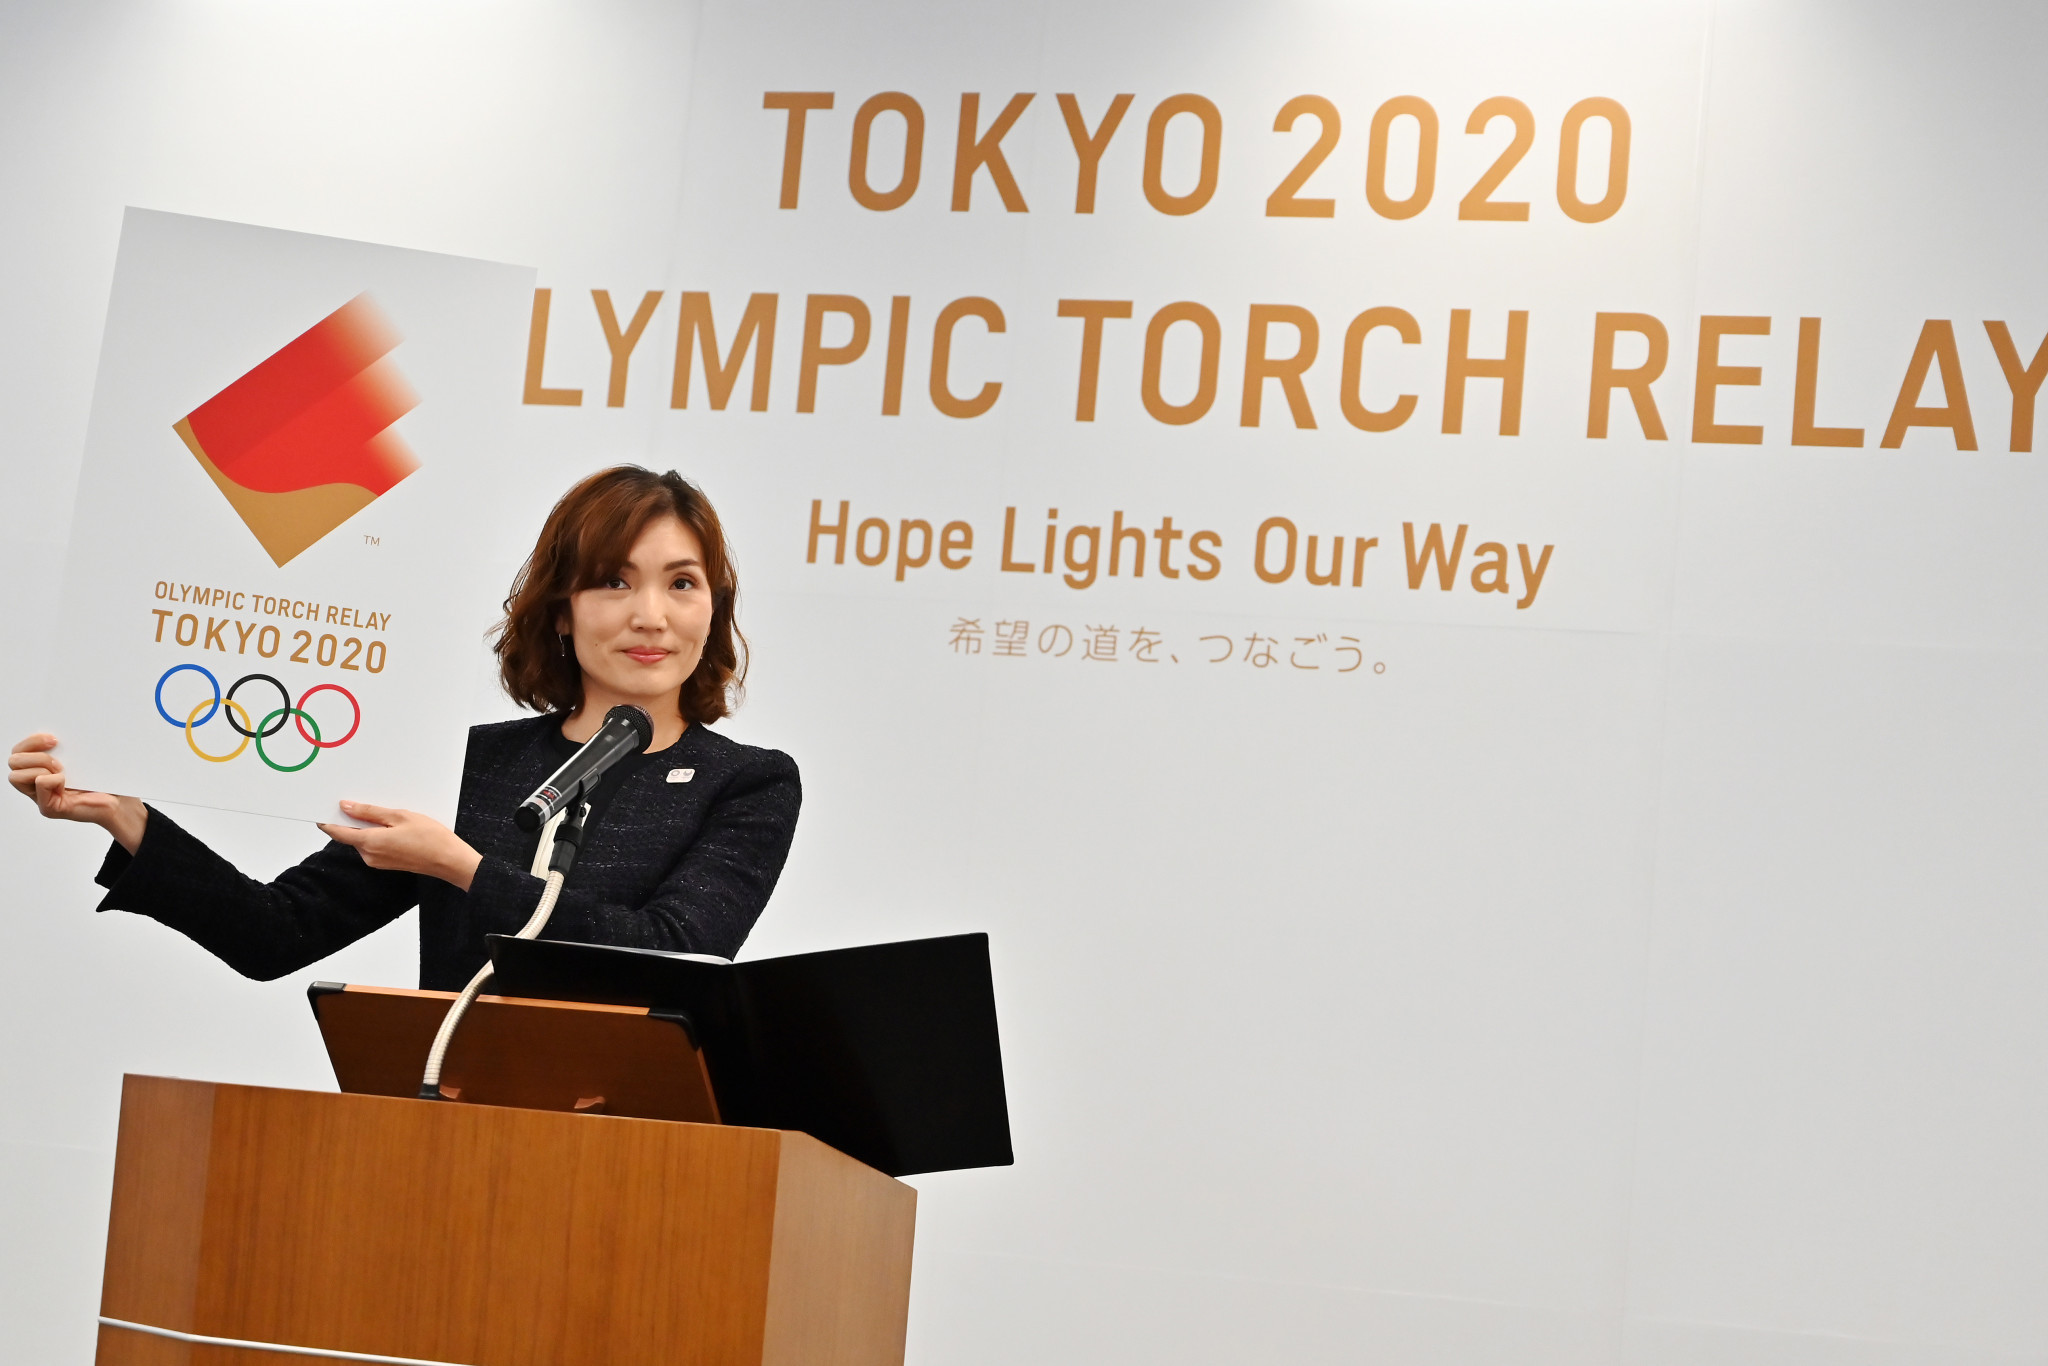 The Tokyo 2020 Olympic Torch Relay emblem was also unveiled today ©Getty Images